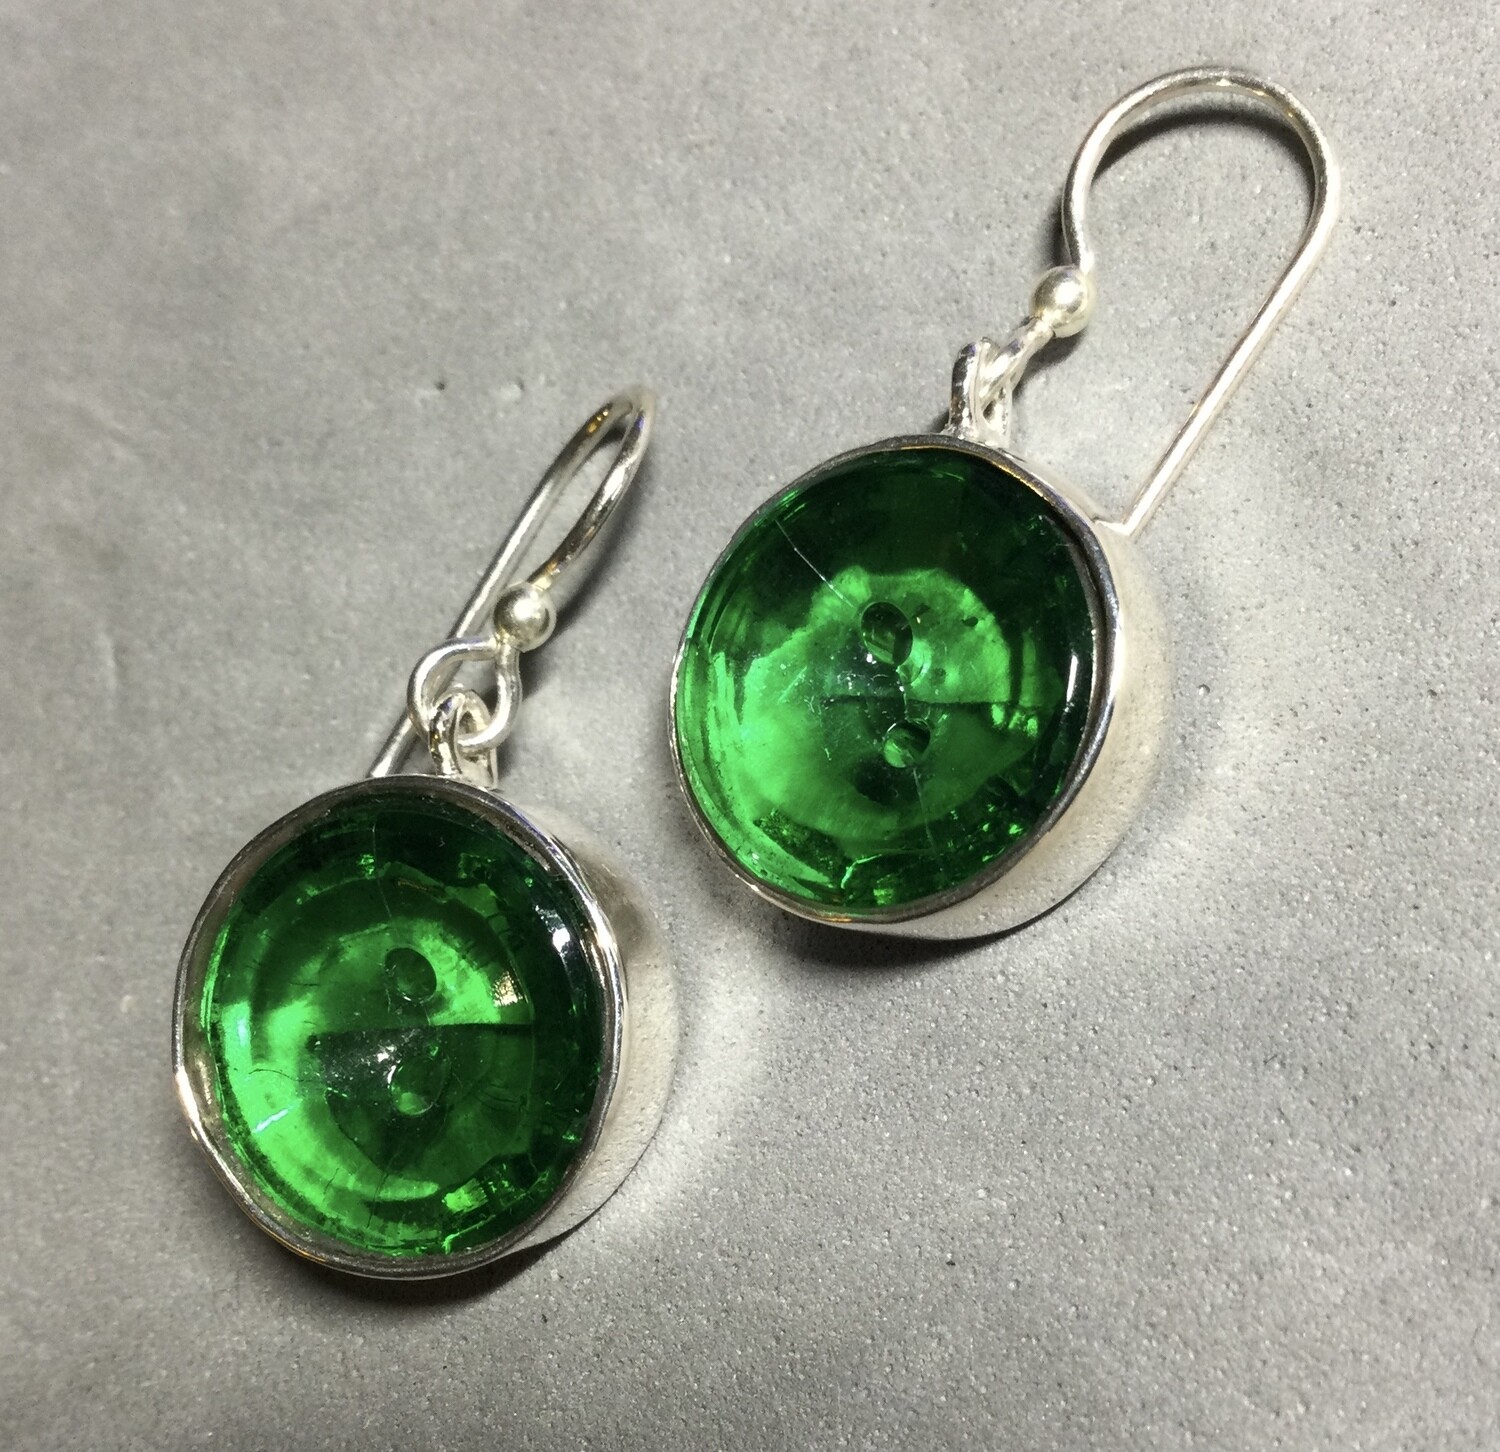 GLASS BUTTONS SET IN STERLING SILVER EARRINGS